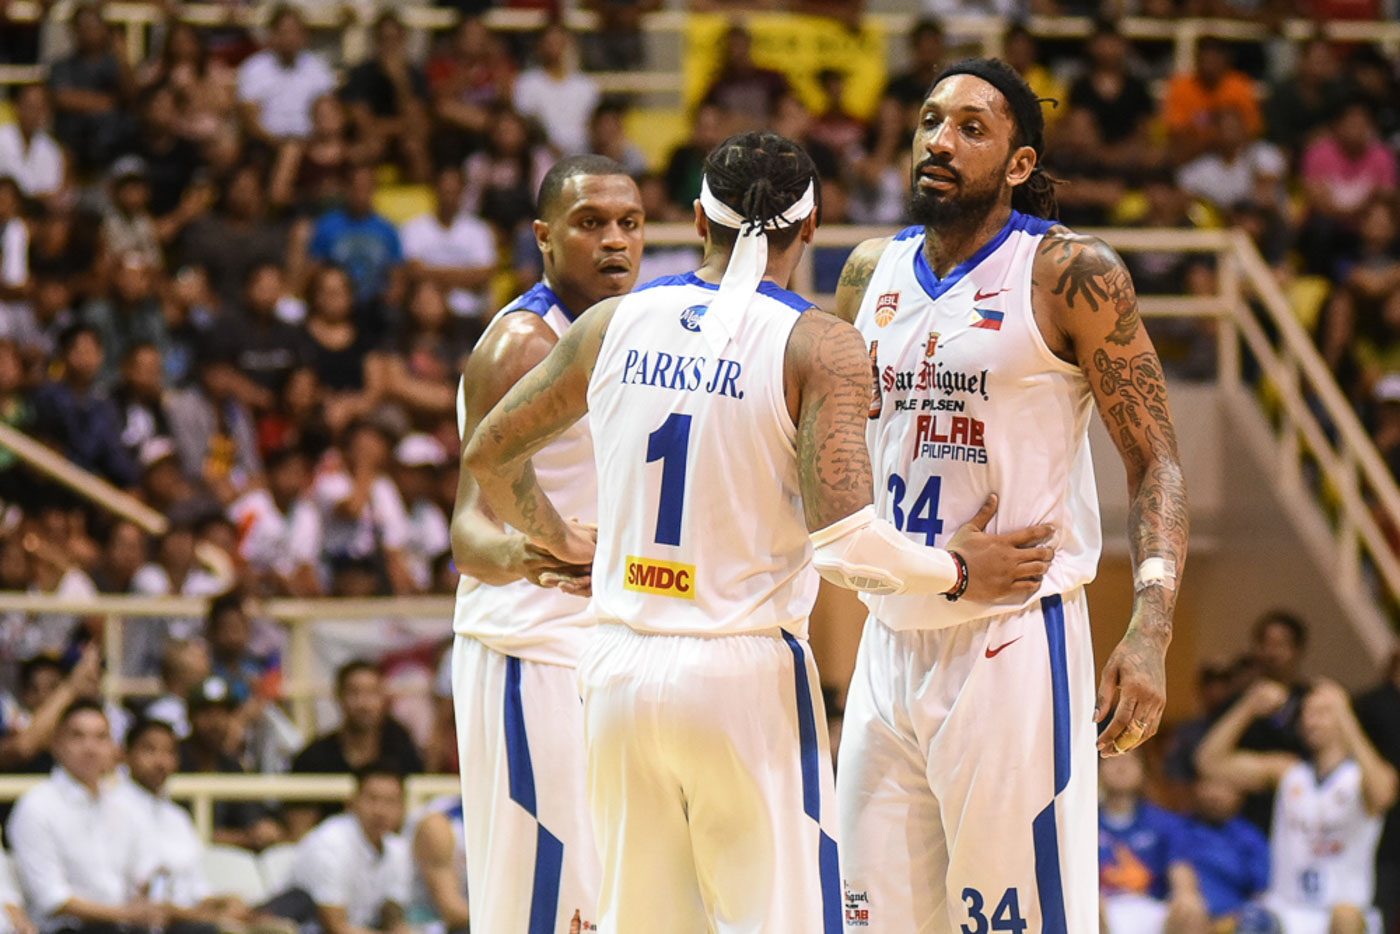 ‘Trust me, it’s not over yet,’ Balkman says as Alab targets bounce-back win